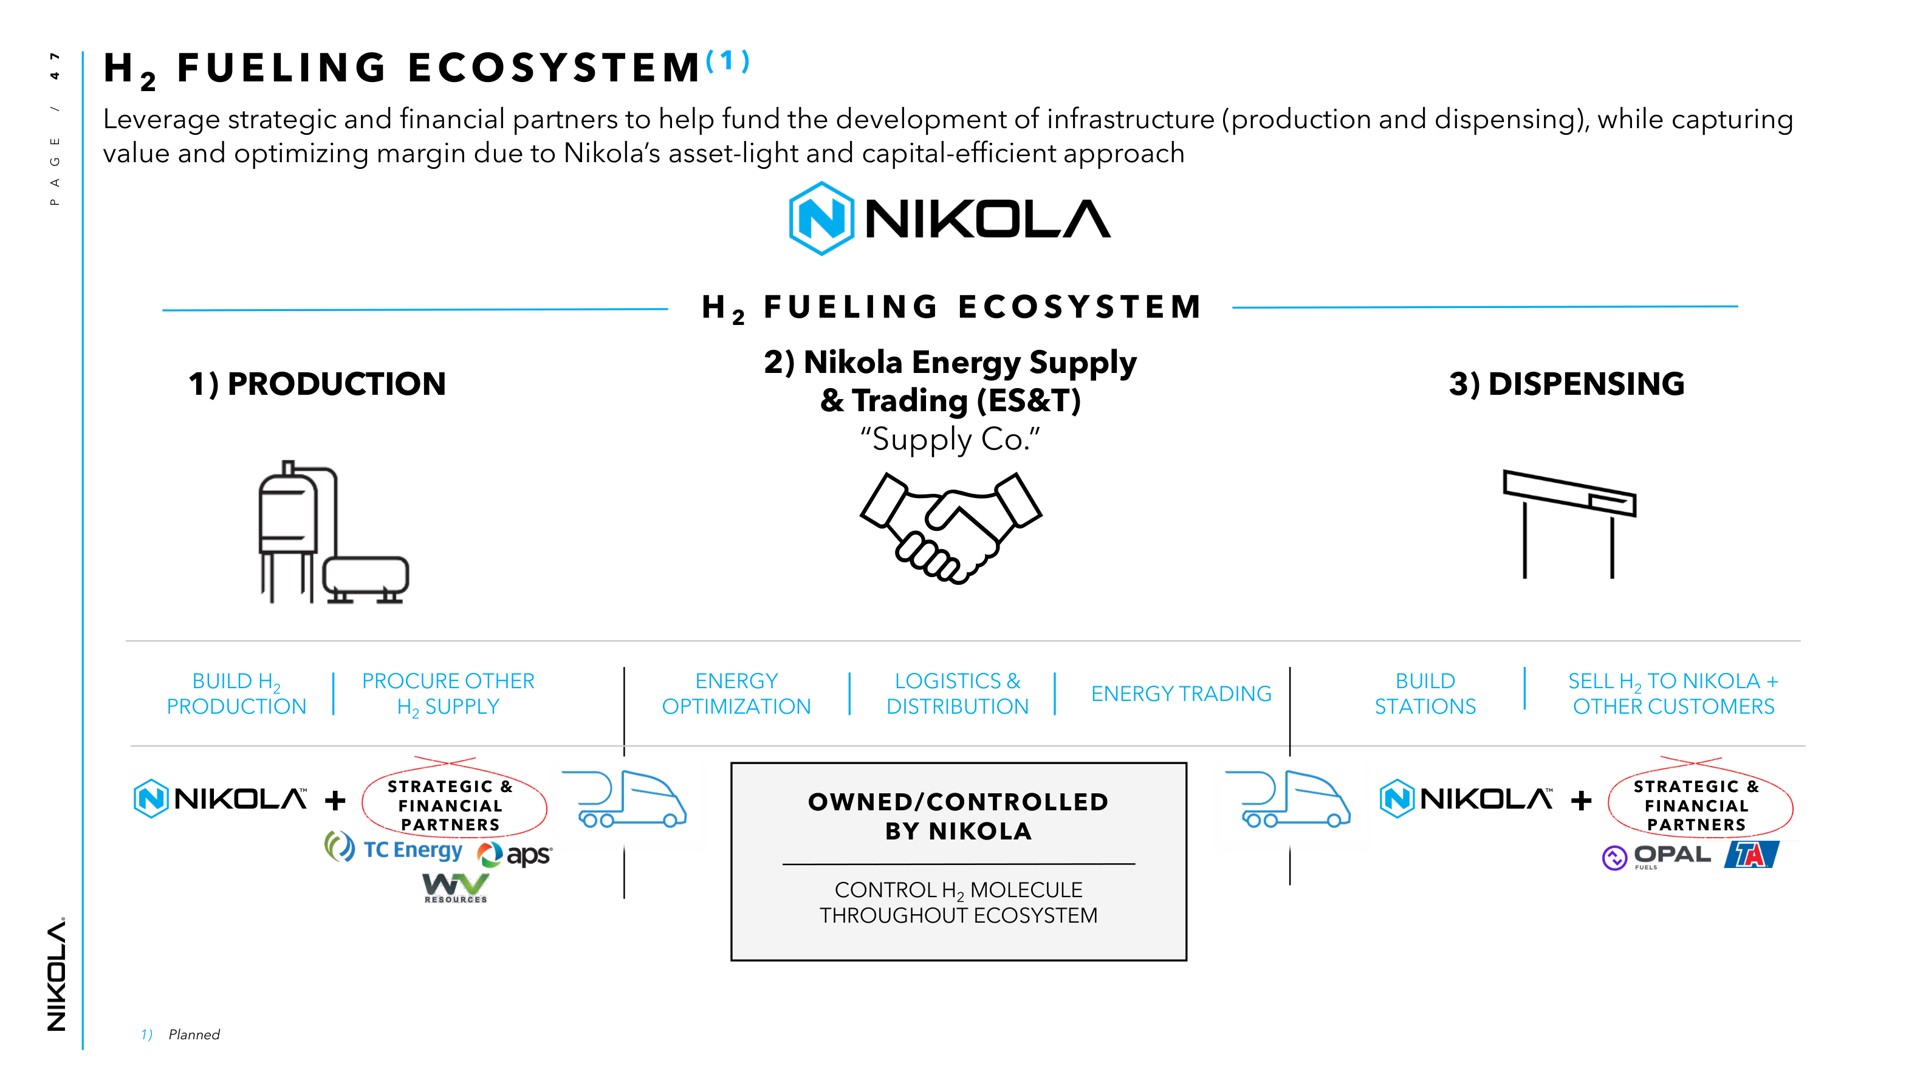 i production i energy supply trading supply dispensing fueling ecosystem leverage strategic and financial partners to help fund the development of infrastructure and while capturing value and optimizing margin due to asset light and capital efficient approach fueling ecosystem opal | Nikola